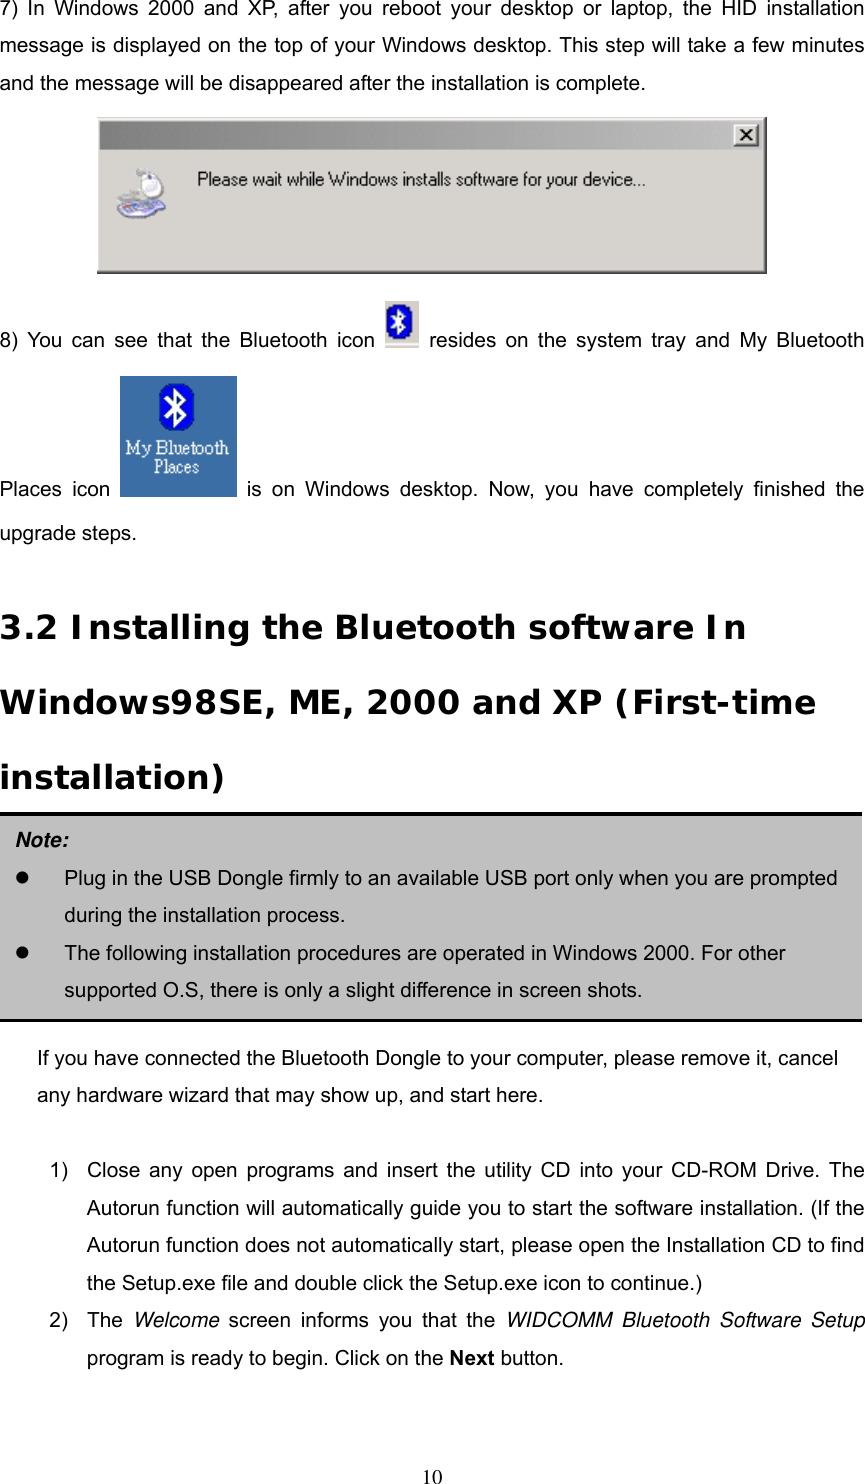 7) In Windows 2000 and XP, after you reboot your desktop or laptop, the HID installation message is displayed on the top of your Windows desktop. This step will take a few minutes and the message will be disappeared after the installation is complete.    8) You can see that the Bluetooth icon   resides on the system tray and My Bluetooth Places icon   is on Windows desktop. Now, you have completely finished the upgrade steps.  3.2 Installing the Bluetooth software In Windows98SE, ME, 2000 and XP (First-time installation)       Note:   Plug in the USB Dongle firmly to an available USB port only when you are prompted during the installation process.   The following installation procedures are operated in Windows 2000. For other supported O.S, there is only a slight difference in screen shots. If you have connected the Bluetooth Dongle to your computer, please remove it, cancel any hardware wizard that may show up, and start here.  1)  Close any open programs and insert the utility CD into your CD-ROM Drive. The Autorun function will automatically guide you to start the software installation. (If the Autorun function does not automatically start, please open the Installation CD to find the Setup.exe file and double click the Setup.exe icon to continue.) 2) The Welcome screen informs you that the WIDCOMM Bluetooth Software Setup program is ready to begin. Click on the Next button.    10 